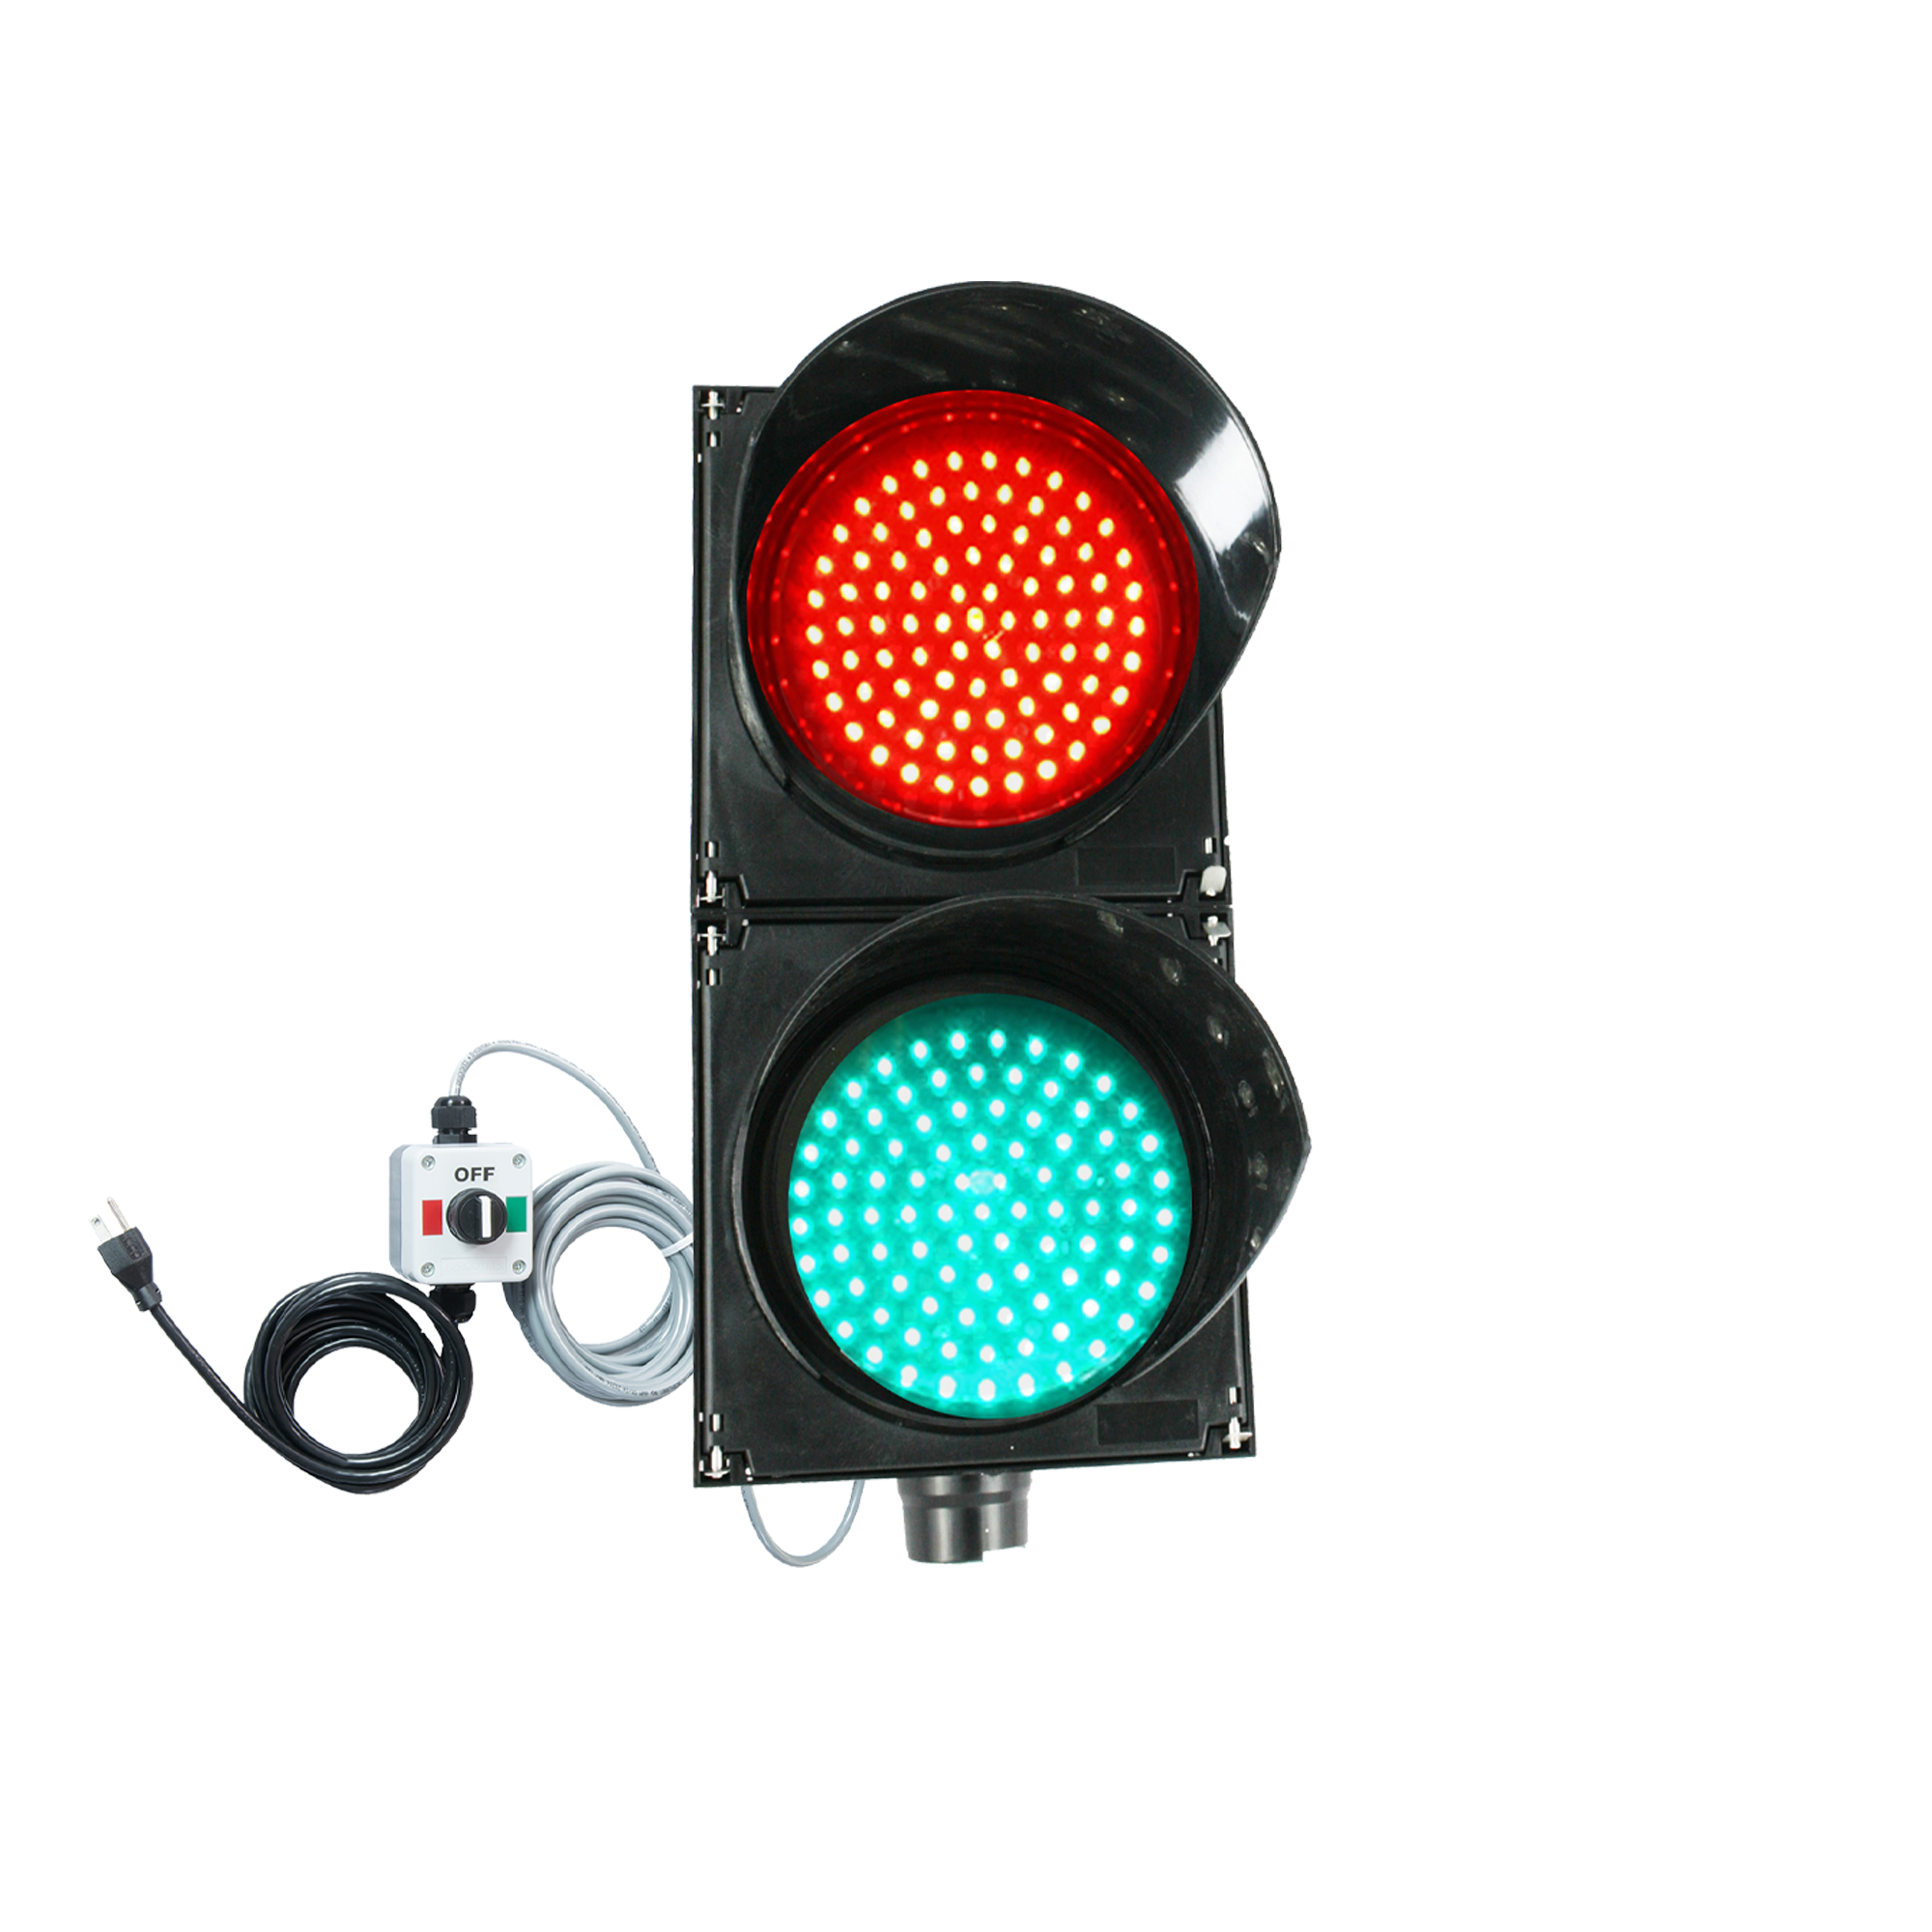 Inch Diameter Lens LED Stop  Go Loading Dock Traffic Light- Color, RED/GREEN,  Position Switch Box, High Flex Cable. (Plug And Play)